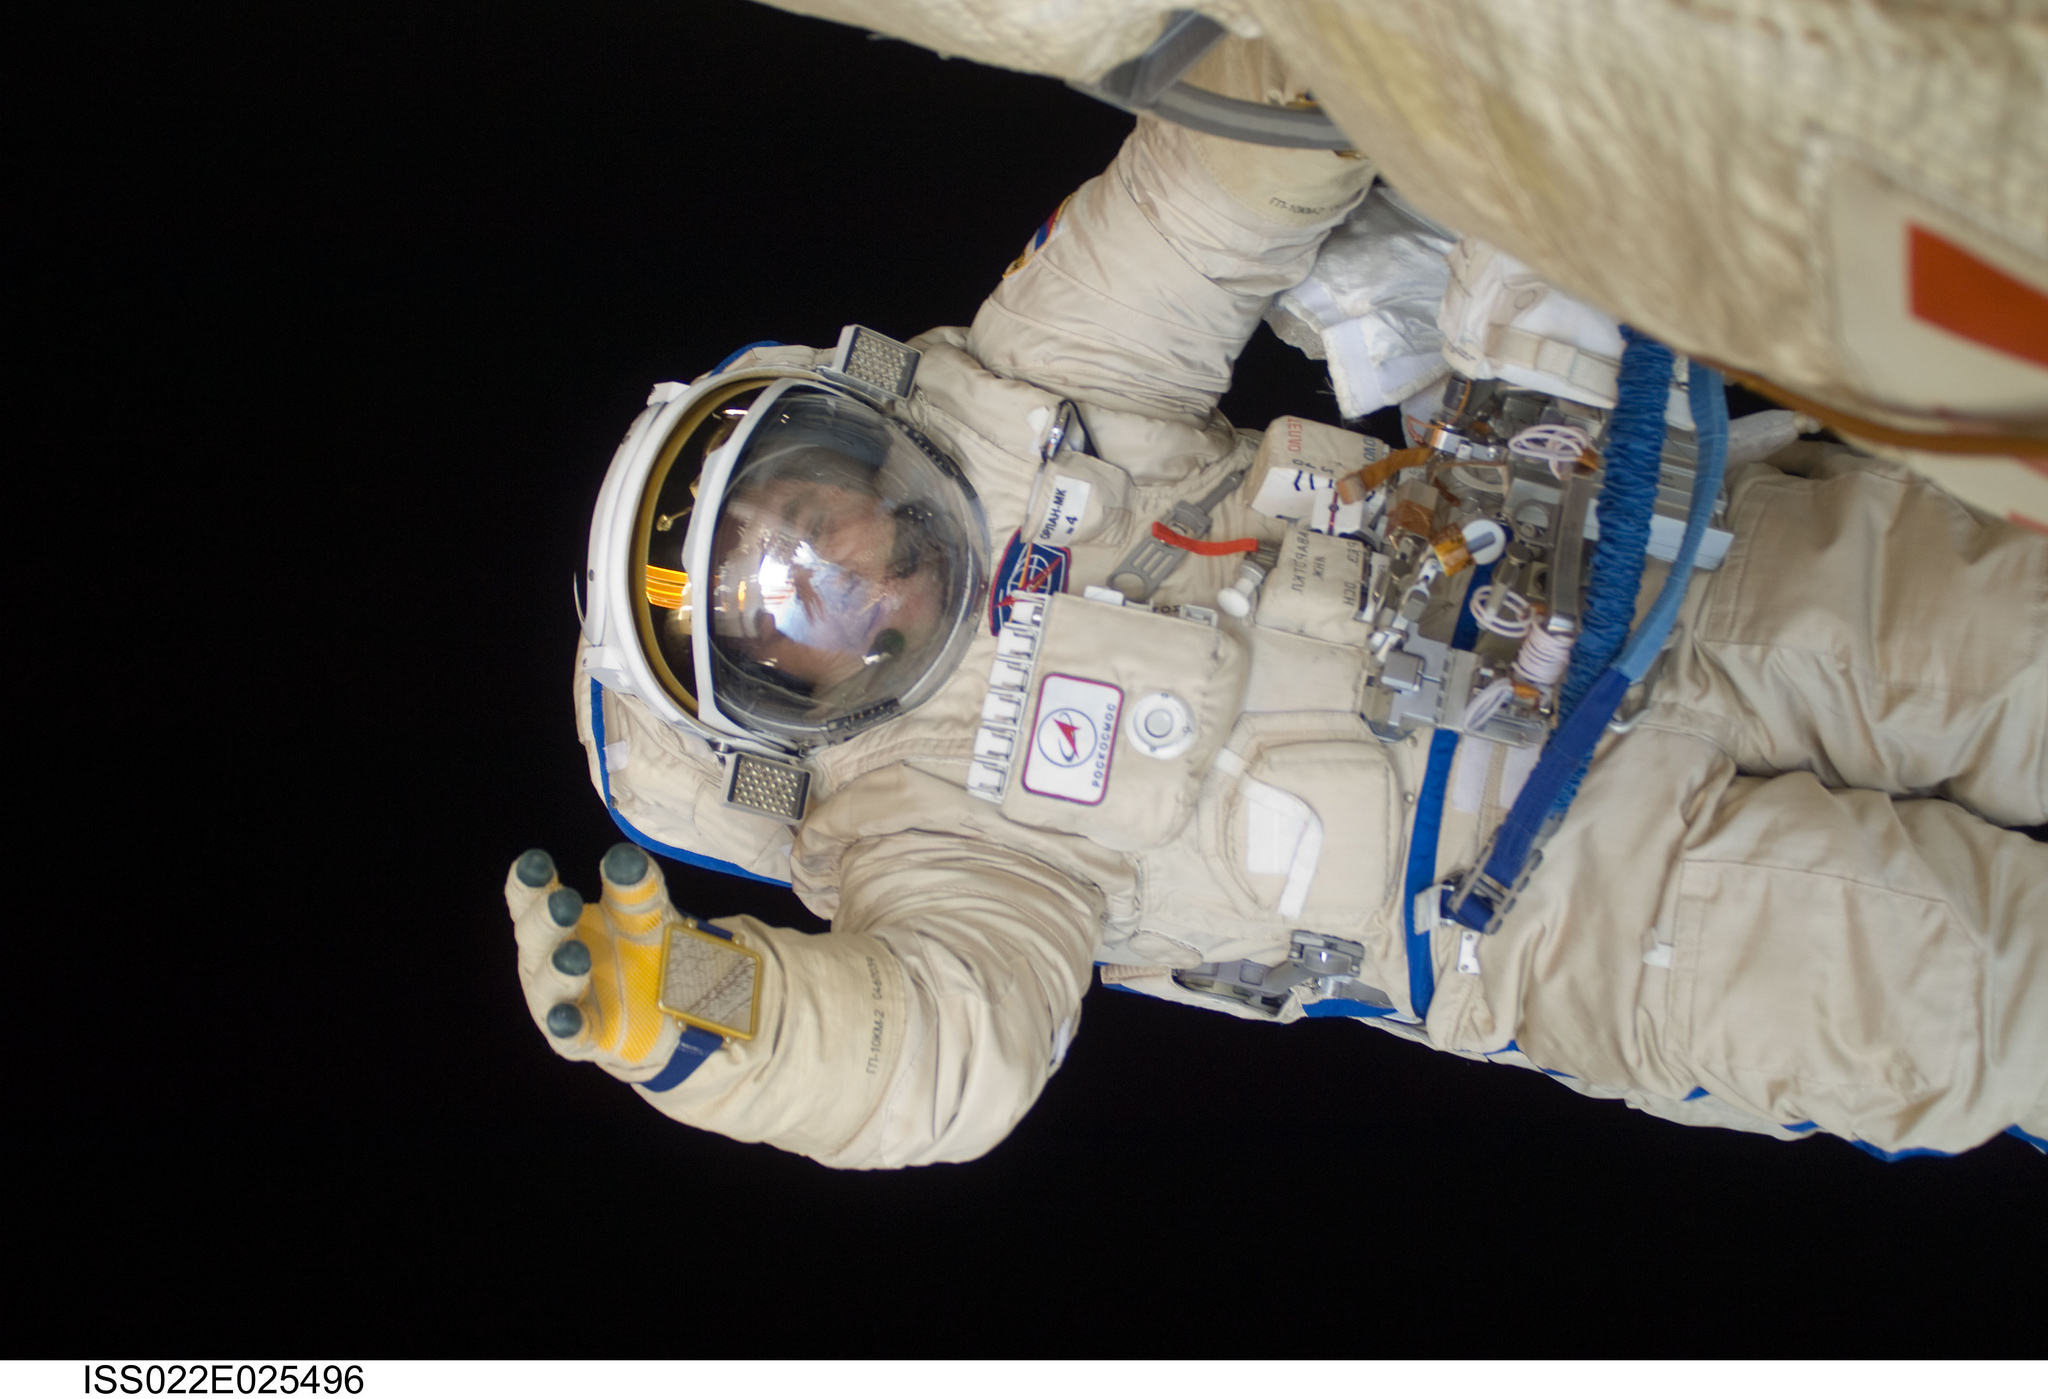 Spacewalker Maxim Suraev works outside the Poisk mini-research module in January 2010.